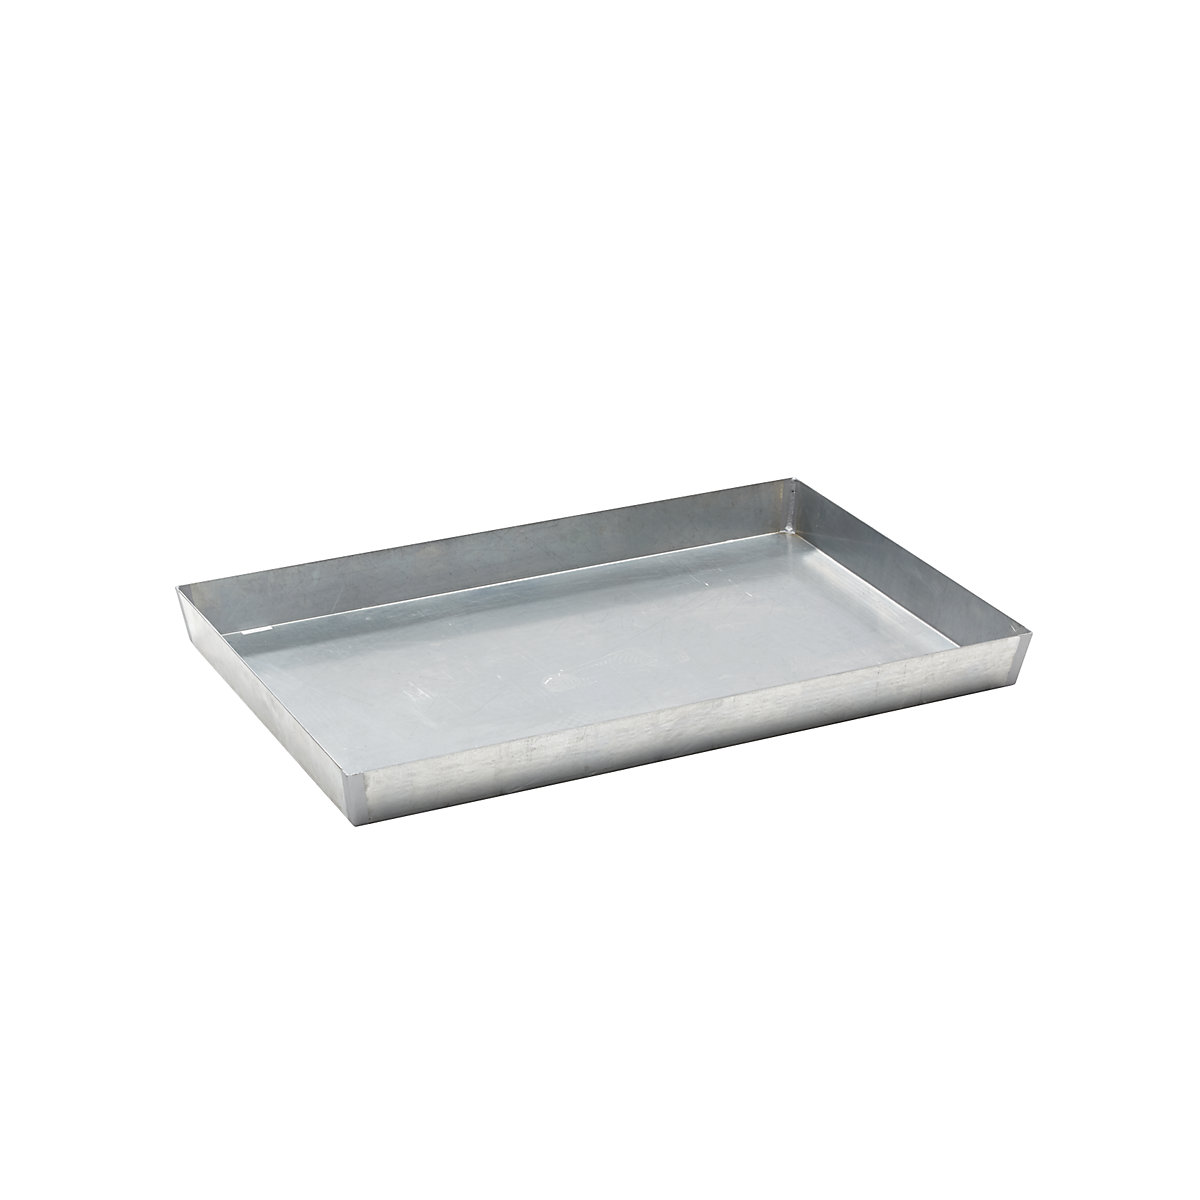 Steel small container pallet tray - eurokraft basic